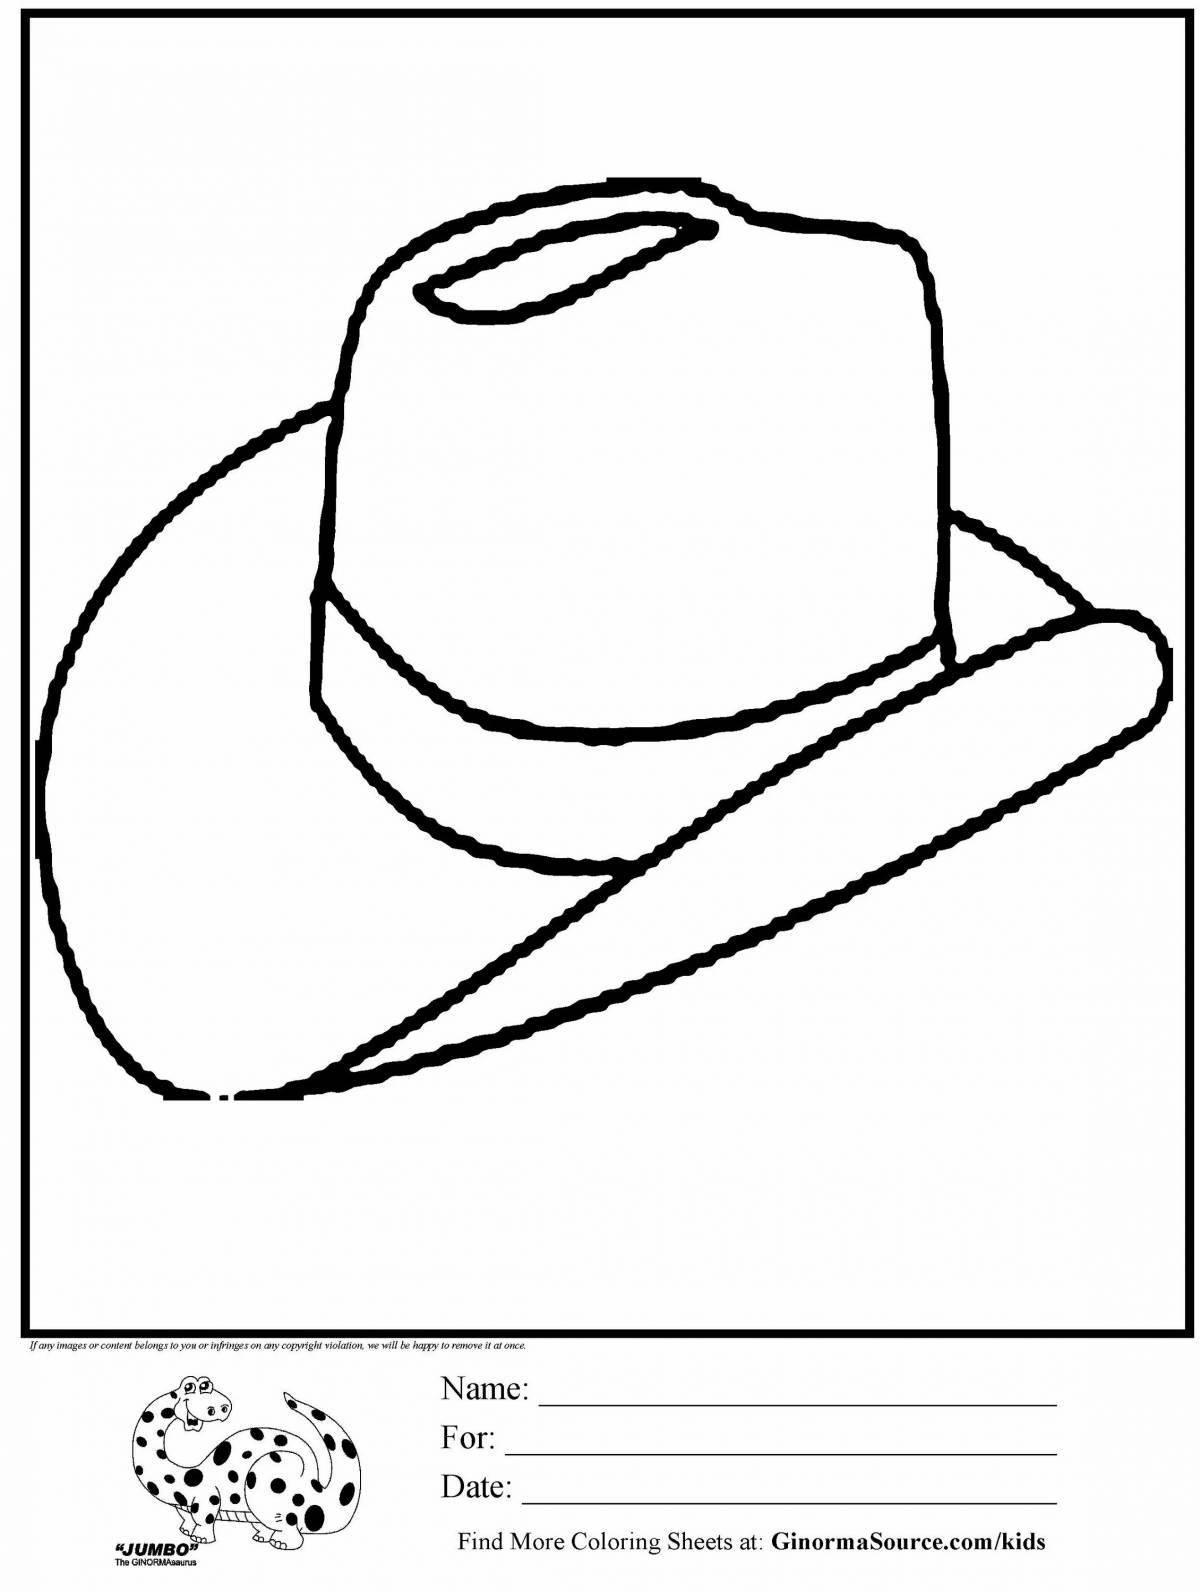 A striking living drawing of a hat